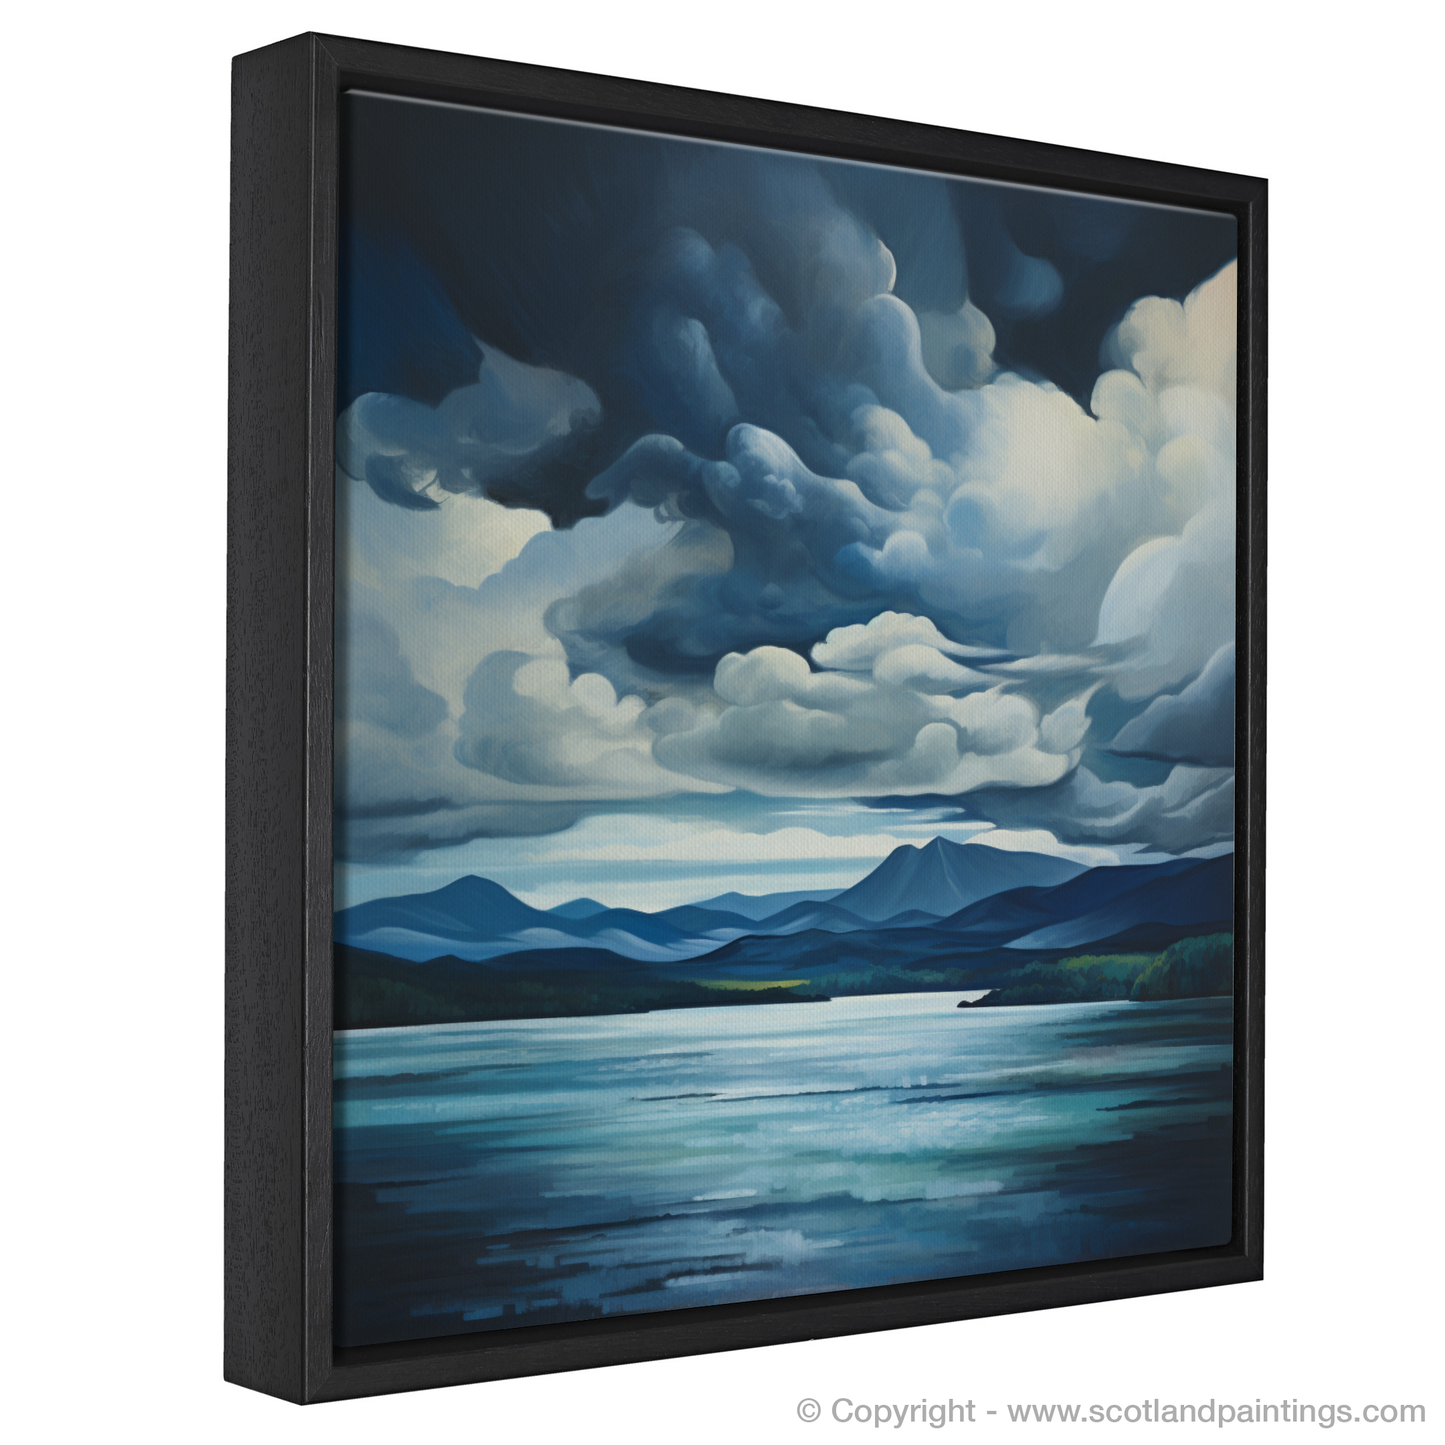 Painting and Art Print of Storm clouds above Loch Lomond entitled "Storm Clouds Dance Over Loch Lomond".